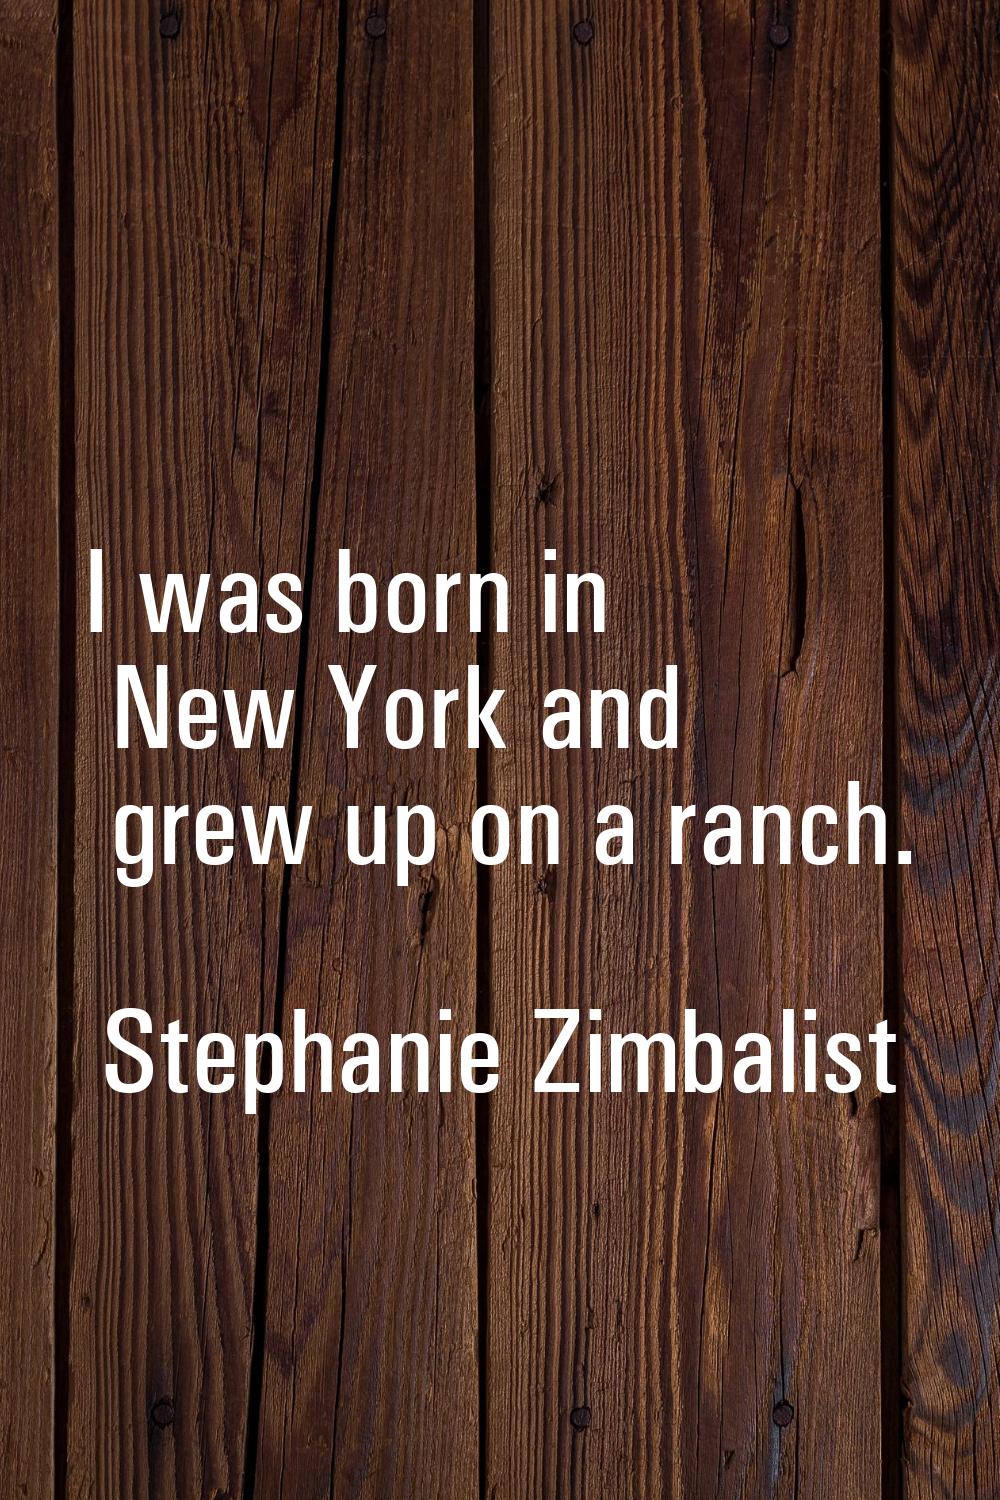 I was born in New York and grew up on a ranch.